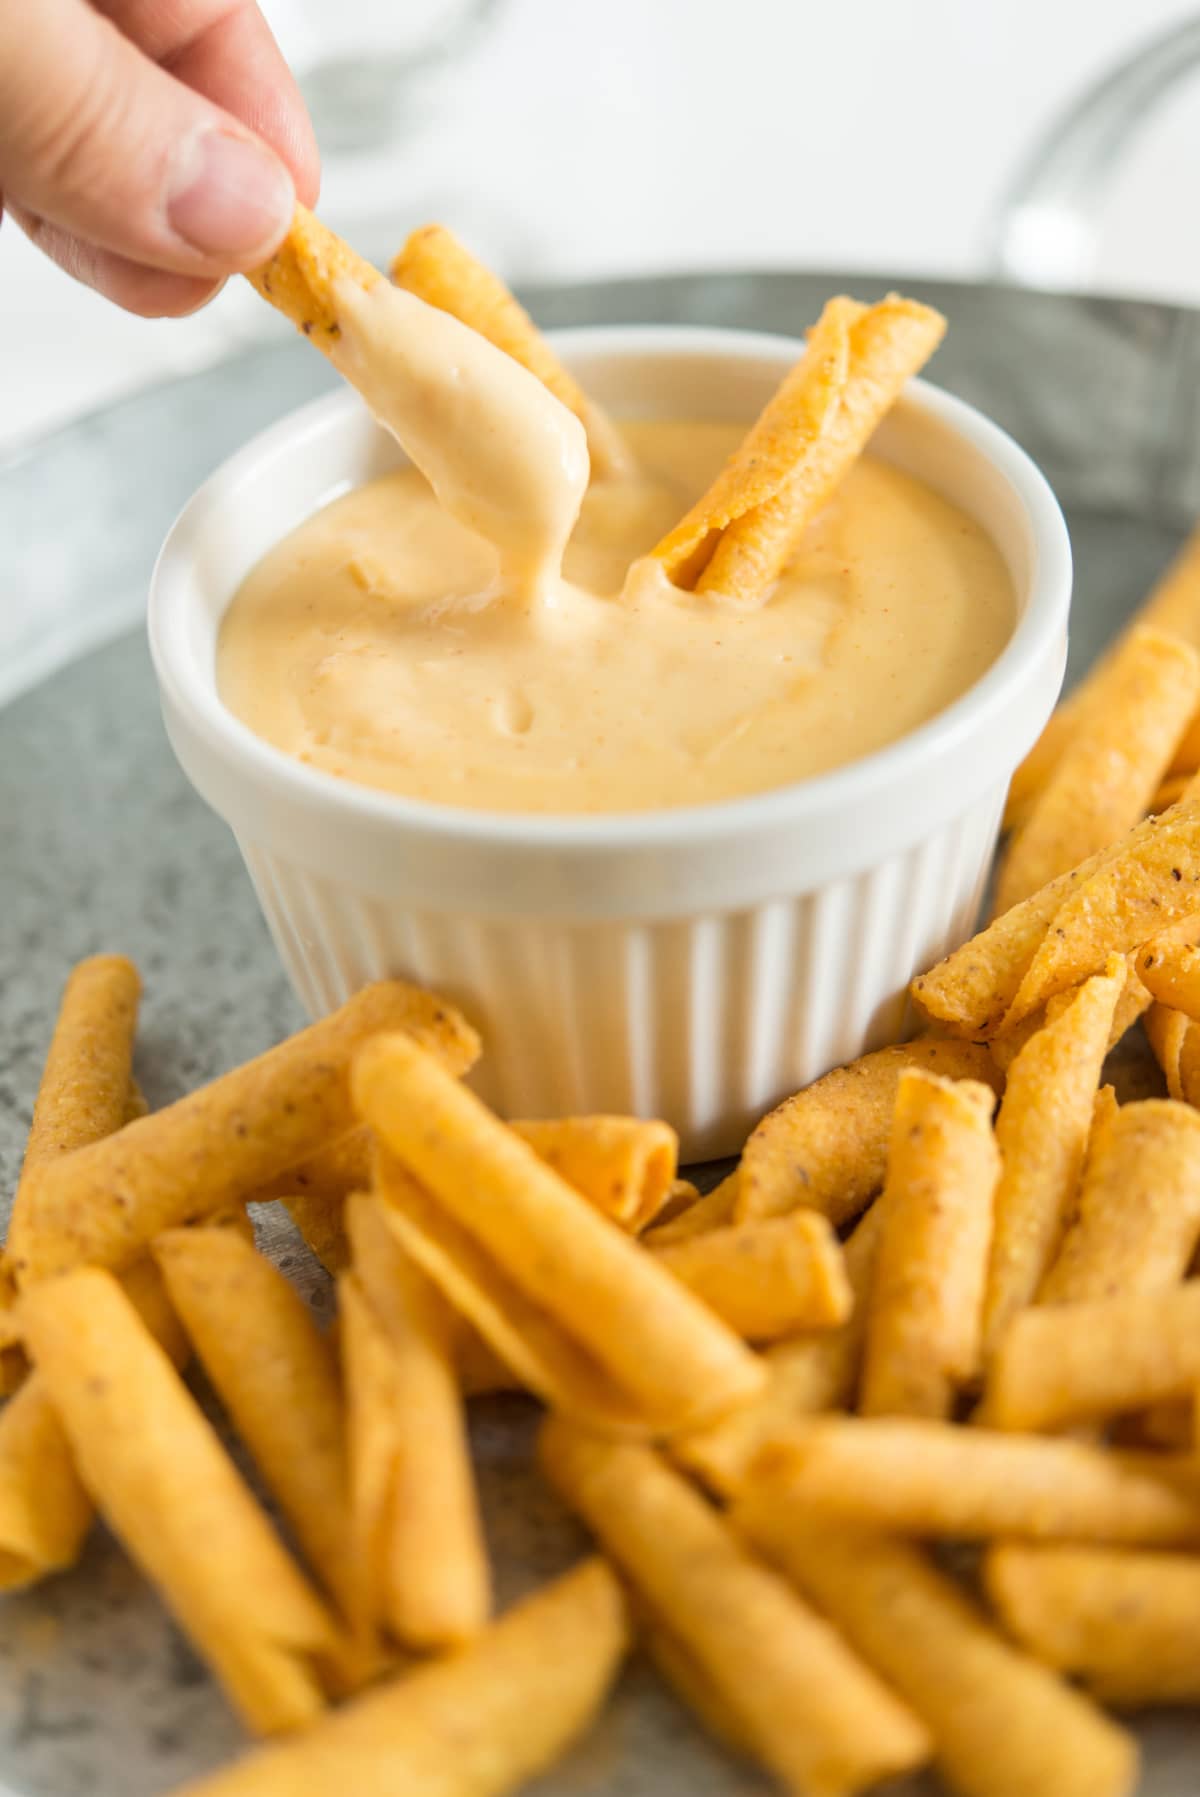 A person dipping a french fry in cheese sauce and fries around the sauce cup